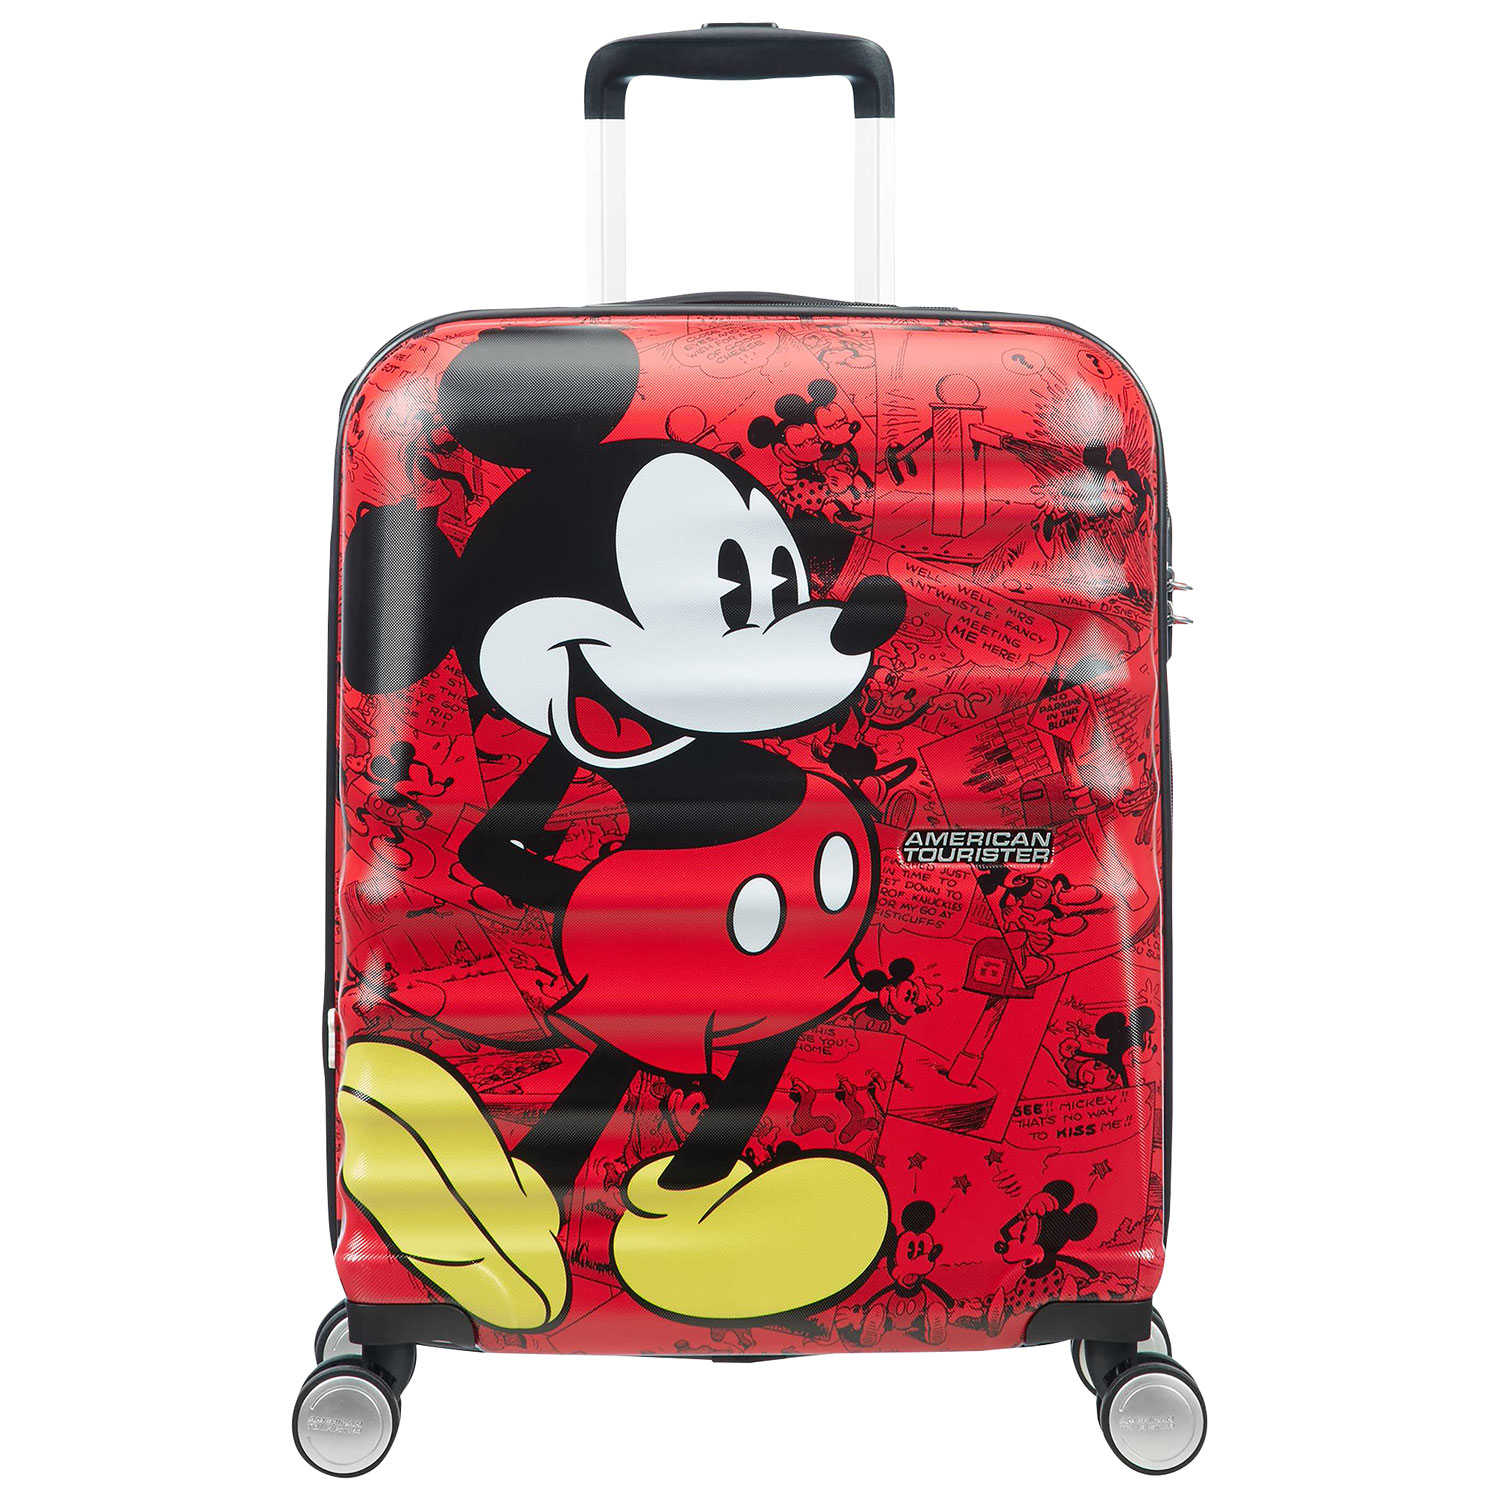 American Tourister Disney Wavebreaker 21" Hard Side Carry-On Luggage - Red/Mickey Mouse